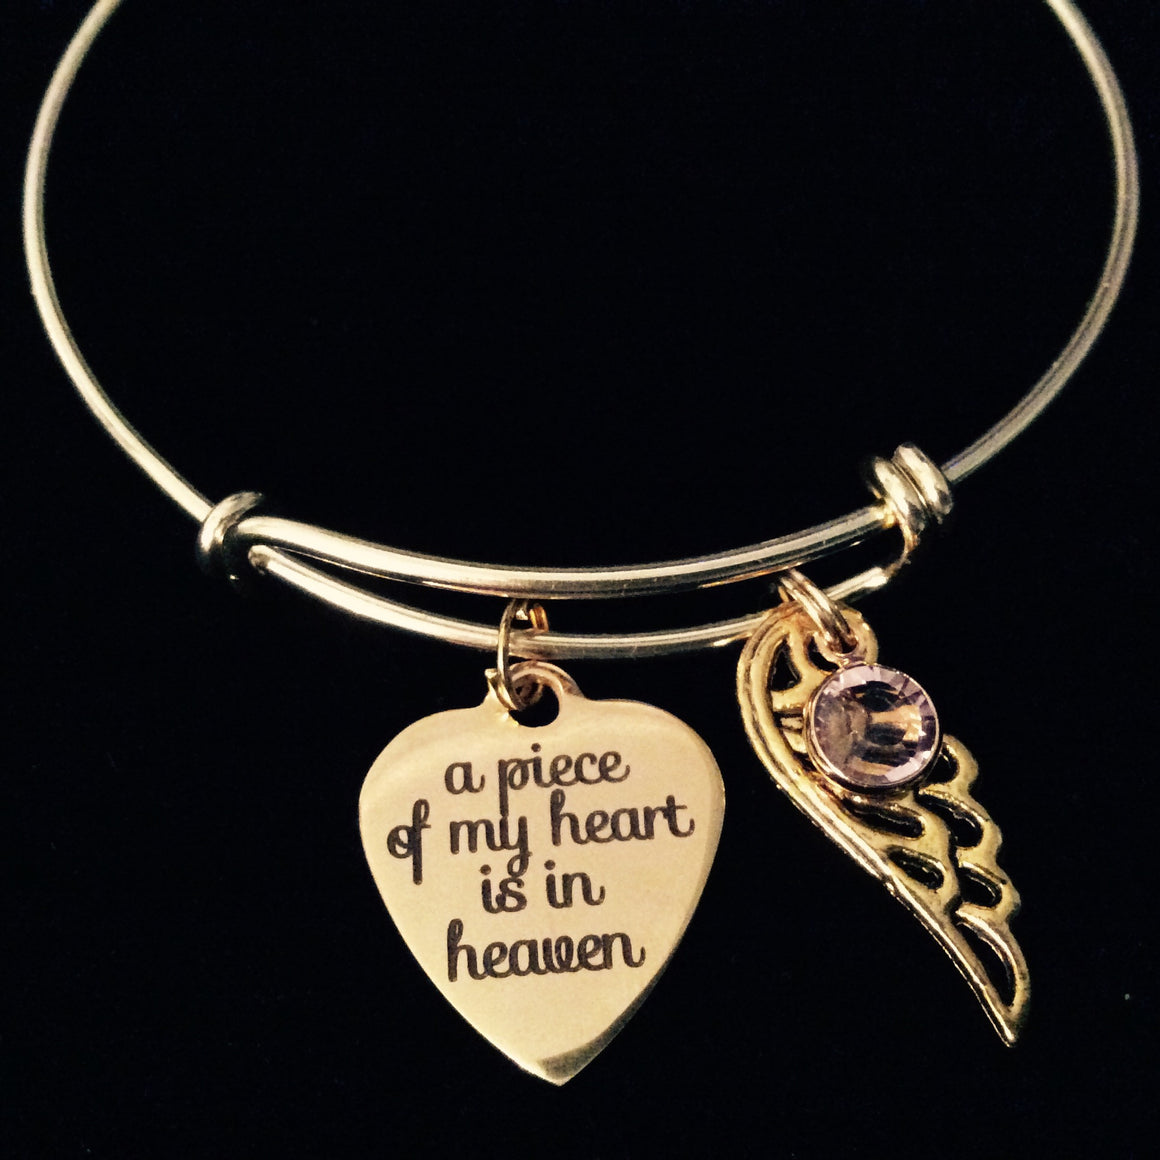 Gold A Piece of My Heart is in Heaven Expandable Charm Bracelet Adjustable Wire Bangle Gift